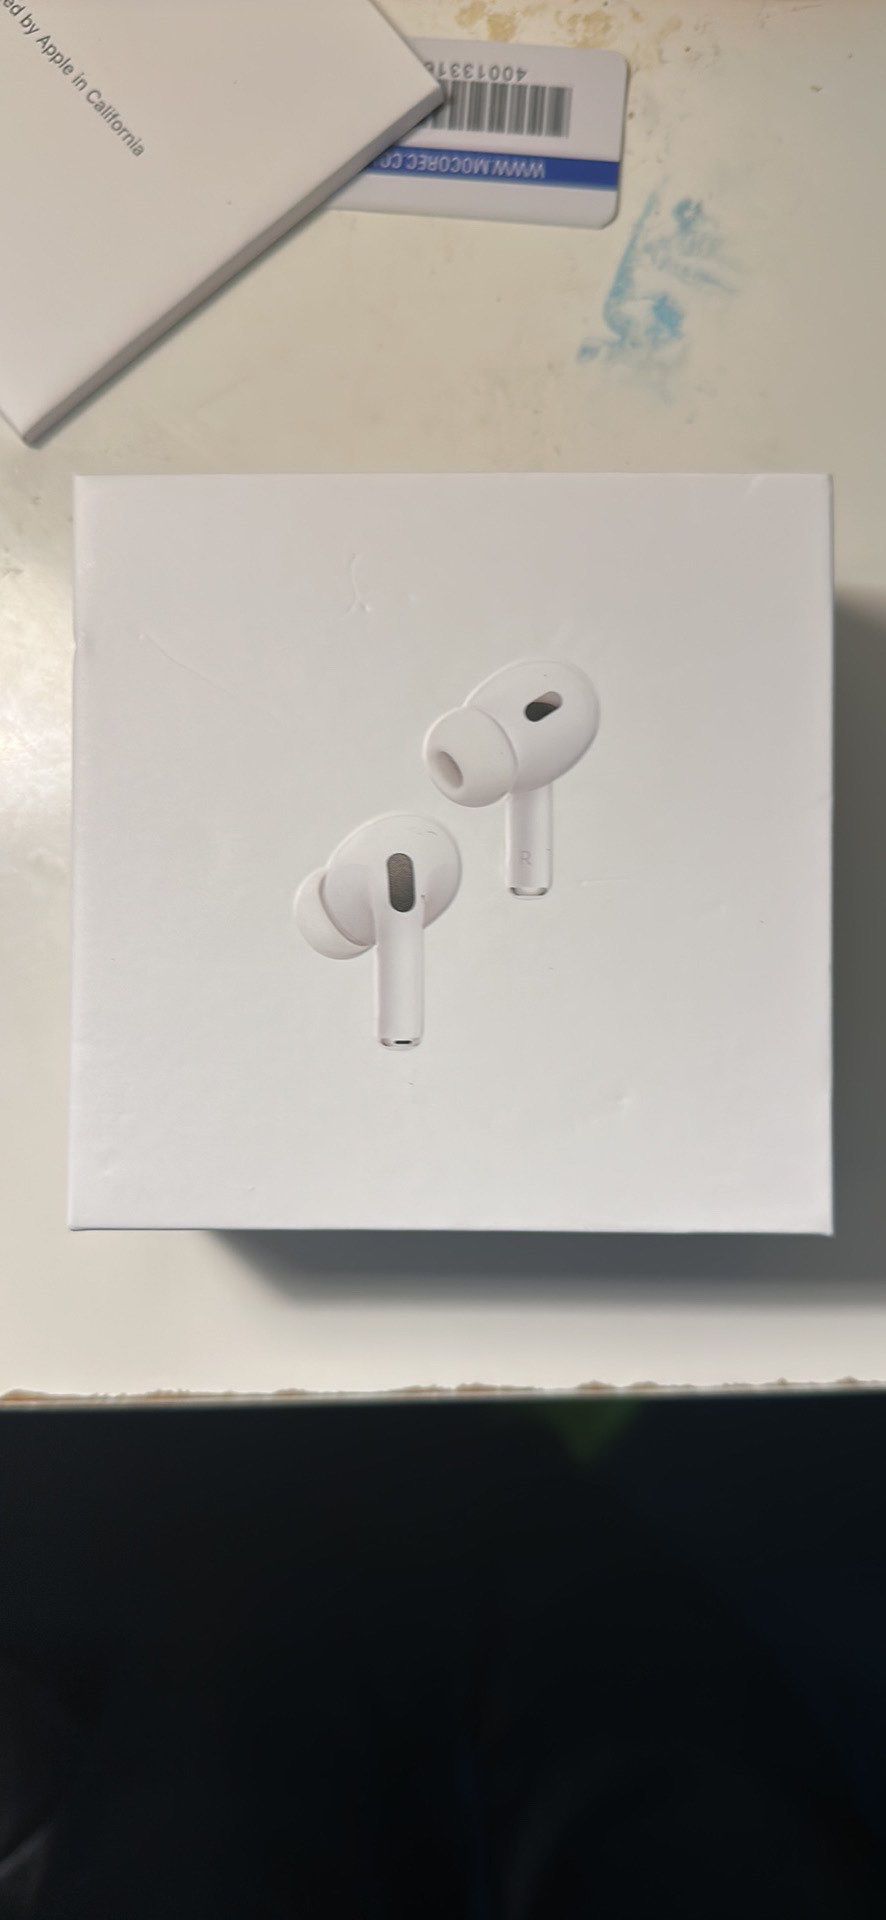 Apple Airpods (2nd Generation)